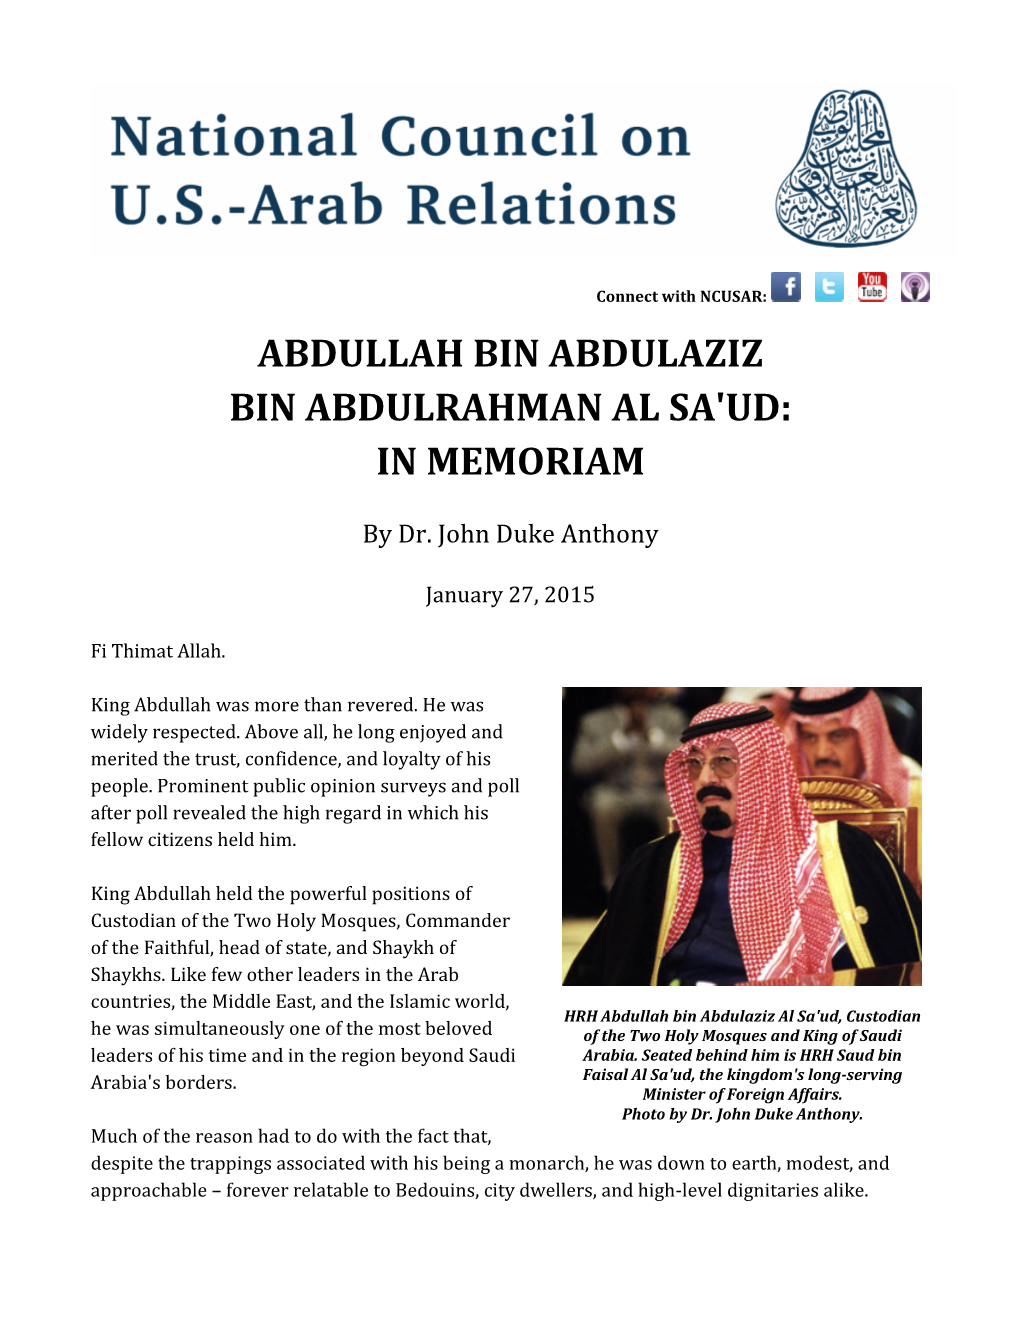 King Abdullah Bin Abdulaziz Al Sa'ud: in Memoriam Page 2 of 9 Government Spending, Or 10 Percent of Its GDP